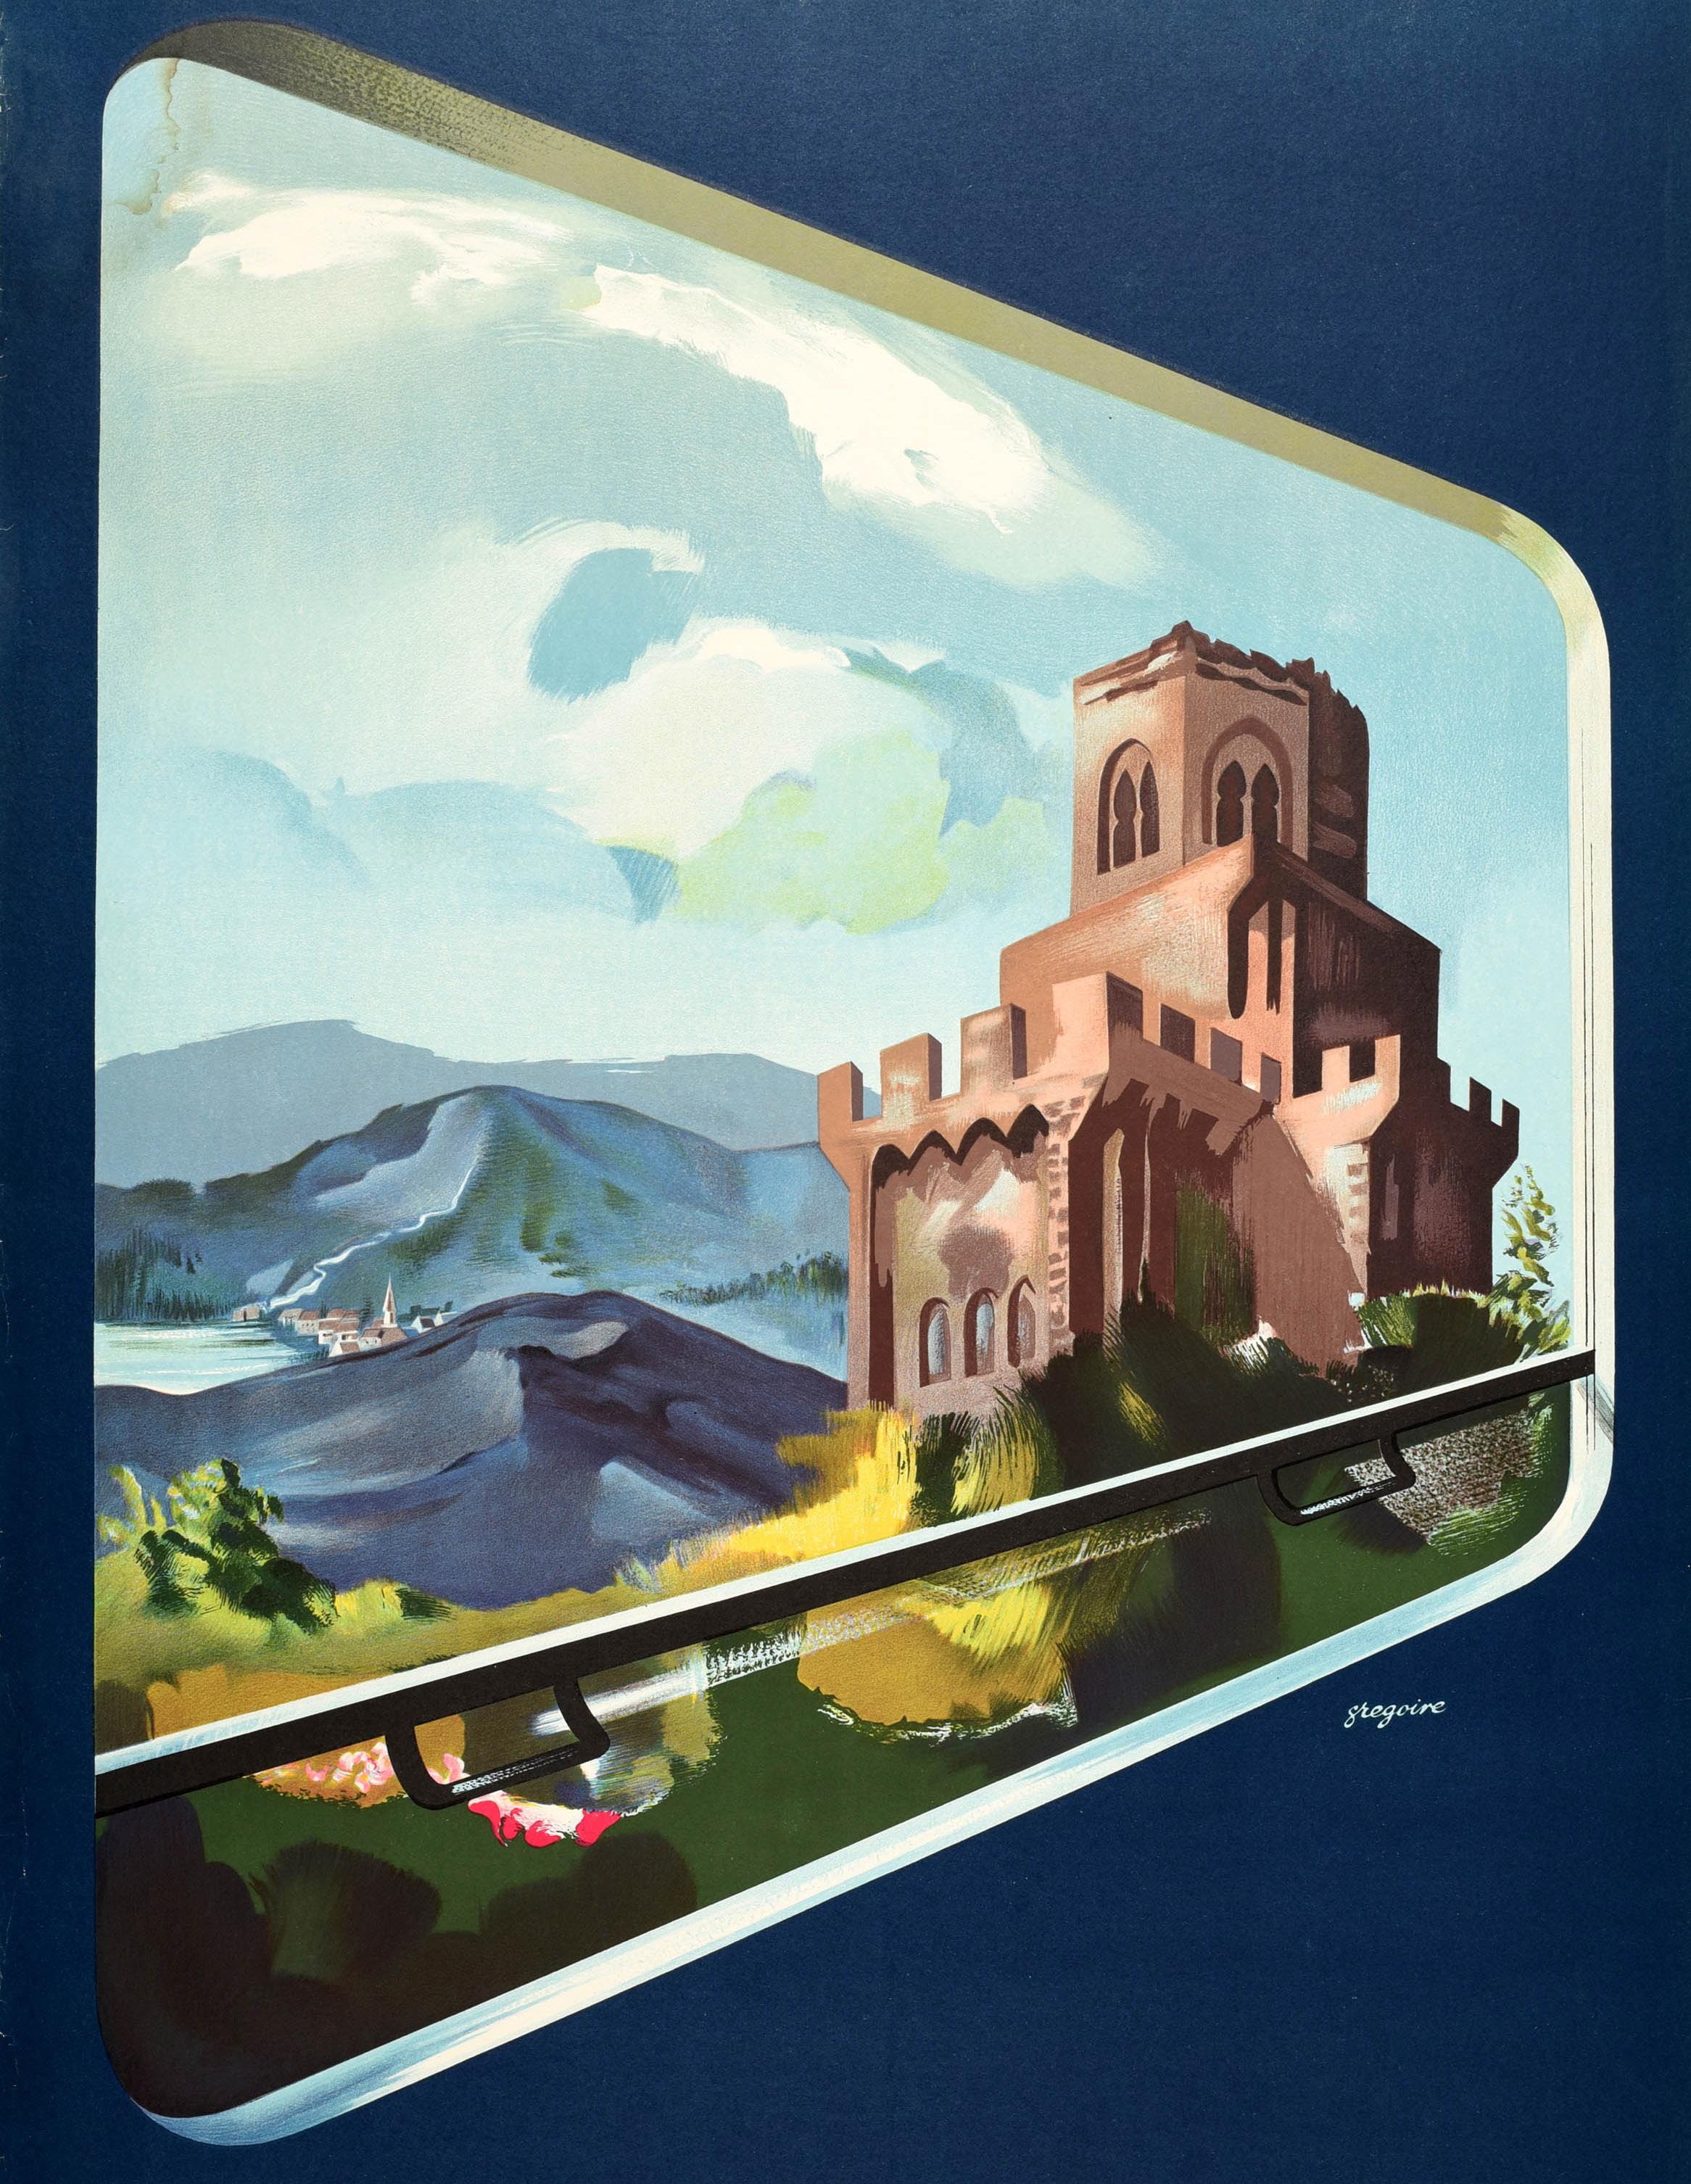 Original vintage railway travel poster - Visit France Auvergne Use the Trains and Motor Coaches of French National Railroads - featuring a scenic view of the Rhone Alps through a train carriage window with an historic chateau castle in the